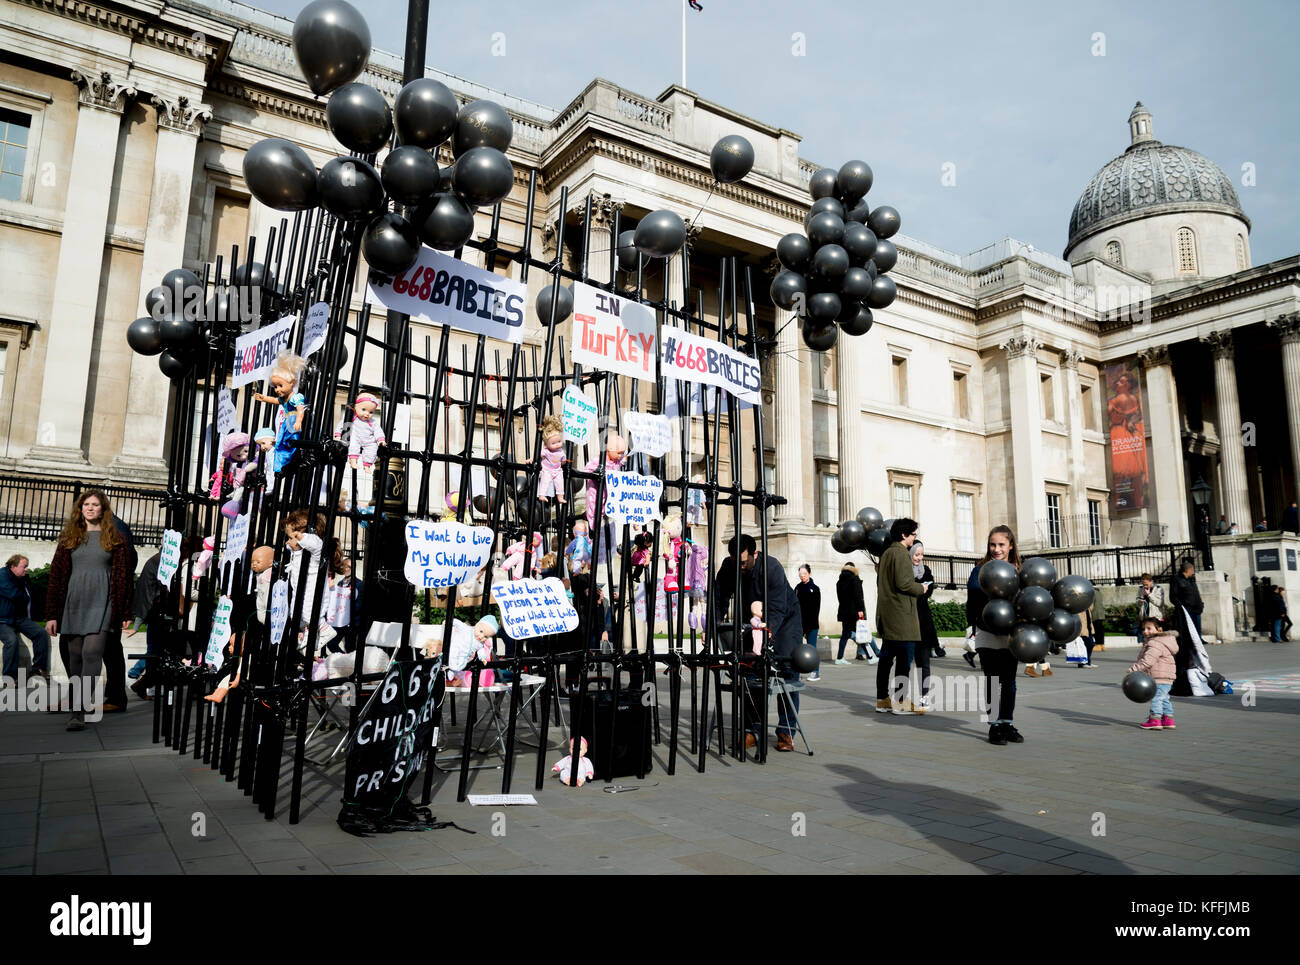 Trafalgar Square, London, UK. 28th Oct, 2017. #66BABIES Protest movement against the 668 babies who are currently locked up in Turkey jail with or without their parents  . The demonstrators denounce the horrible living conditions and the ridiculous reasons sometimes that why some womens are  put in jail,  Trafalgar Square,London. 28/10/2017 Credit: Alexandra Salou/Alamy Live News Stock Photo